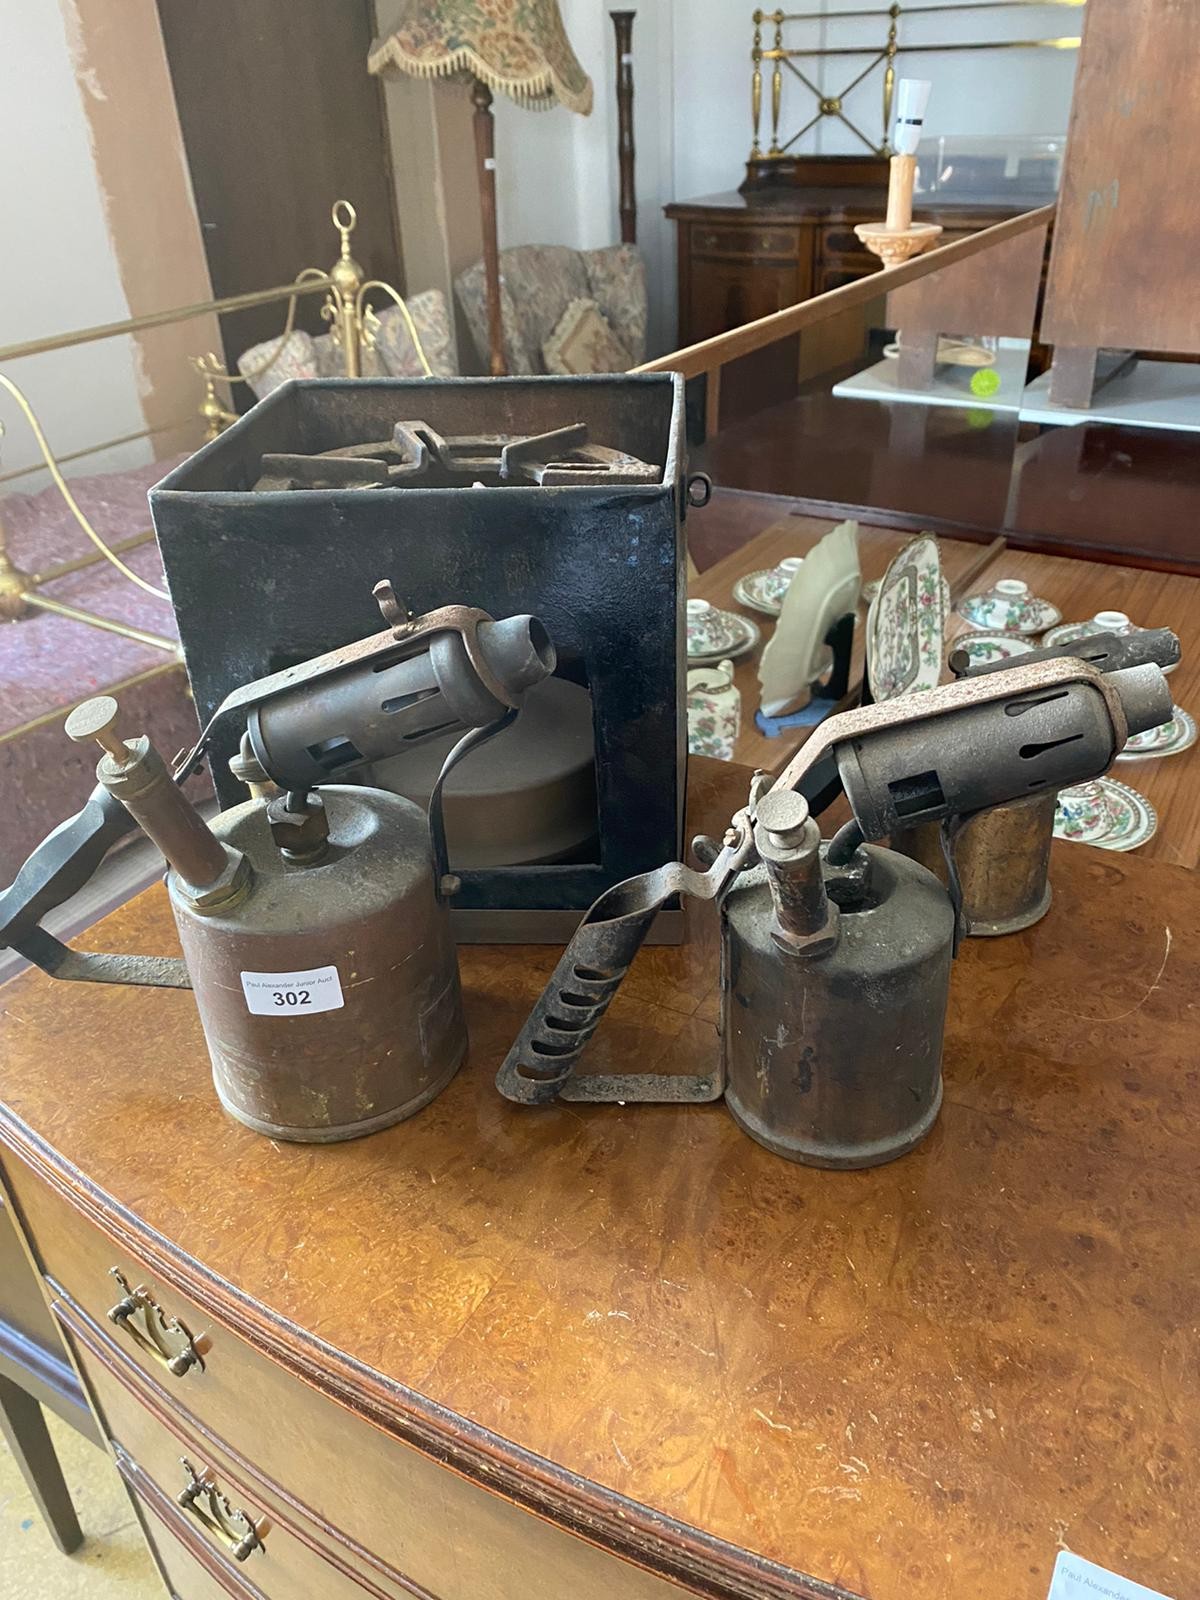 Lot of vintage blow torches and vintage stove . - Image 3 of 3